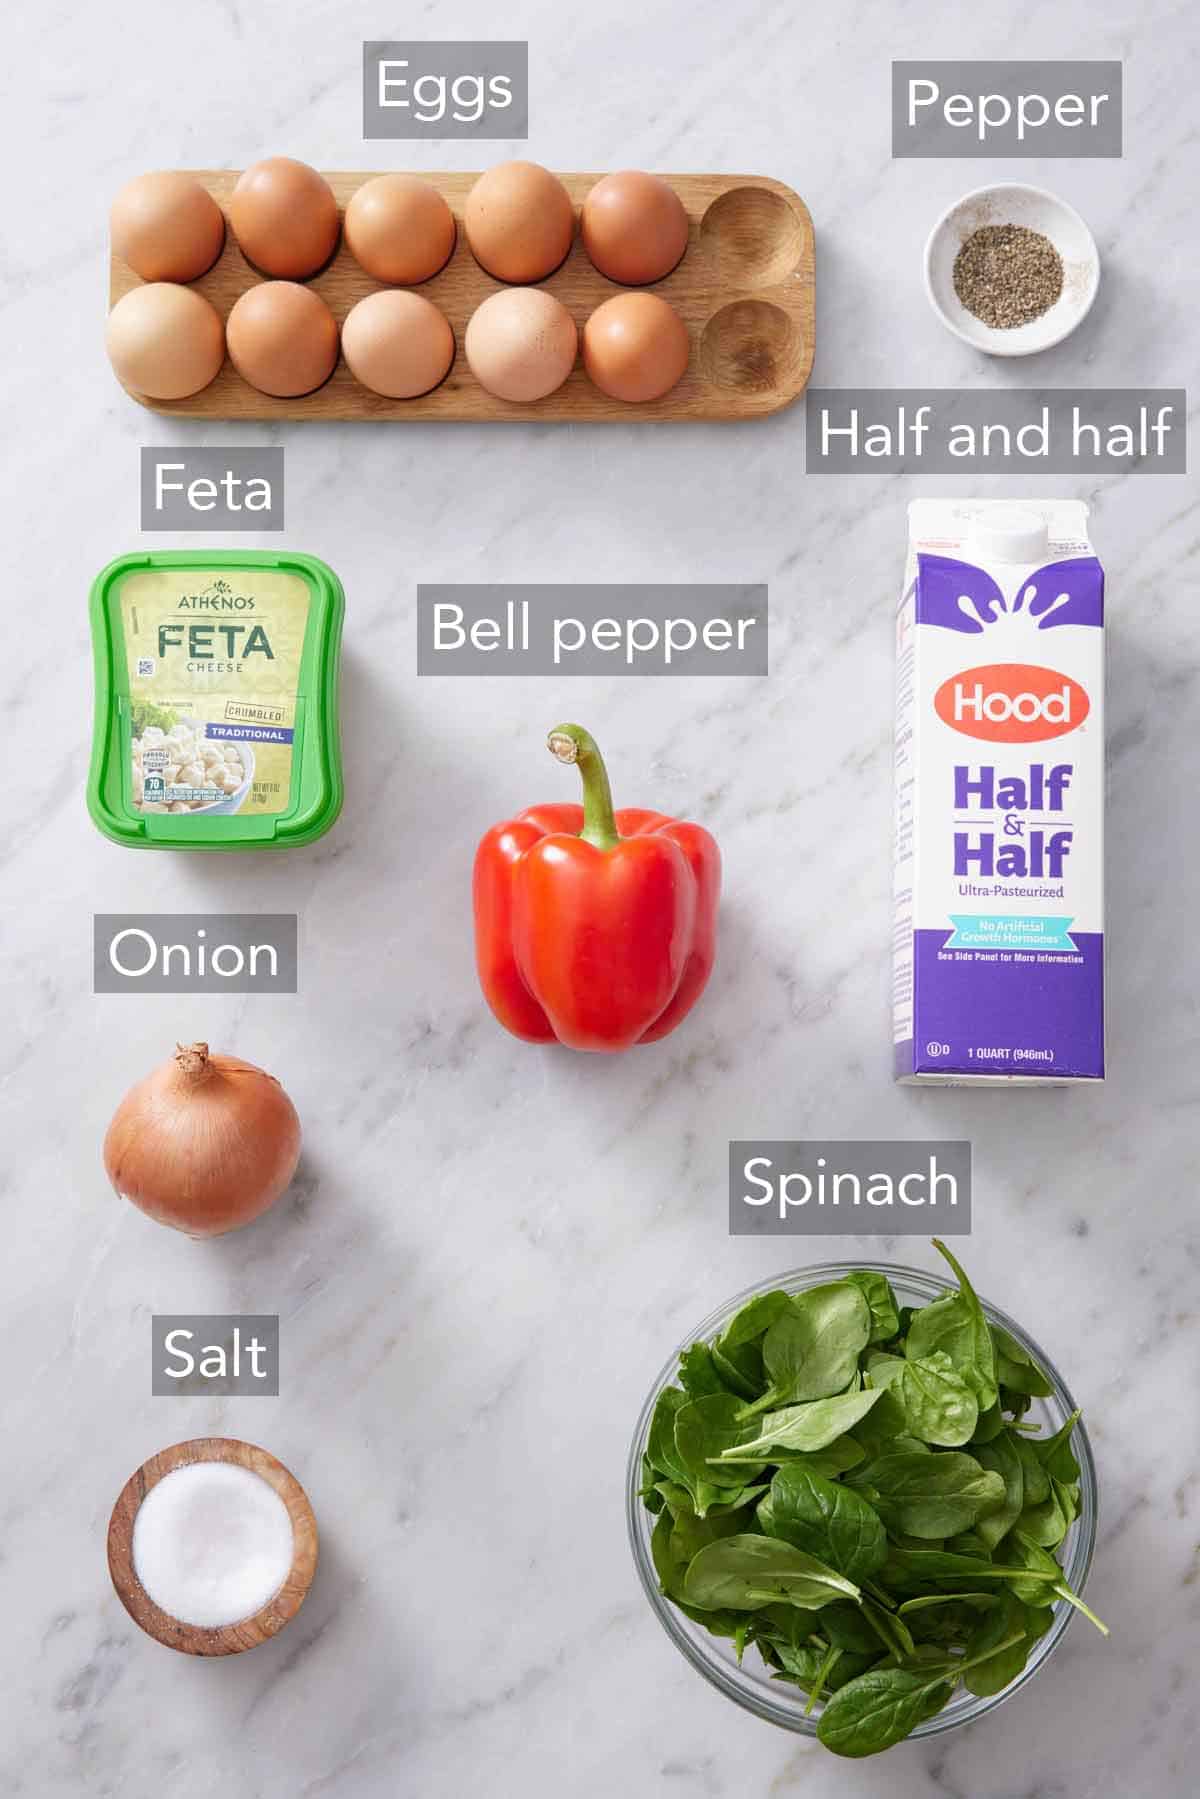 Ingredients needed to make egg muffins.